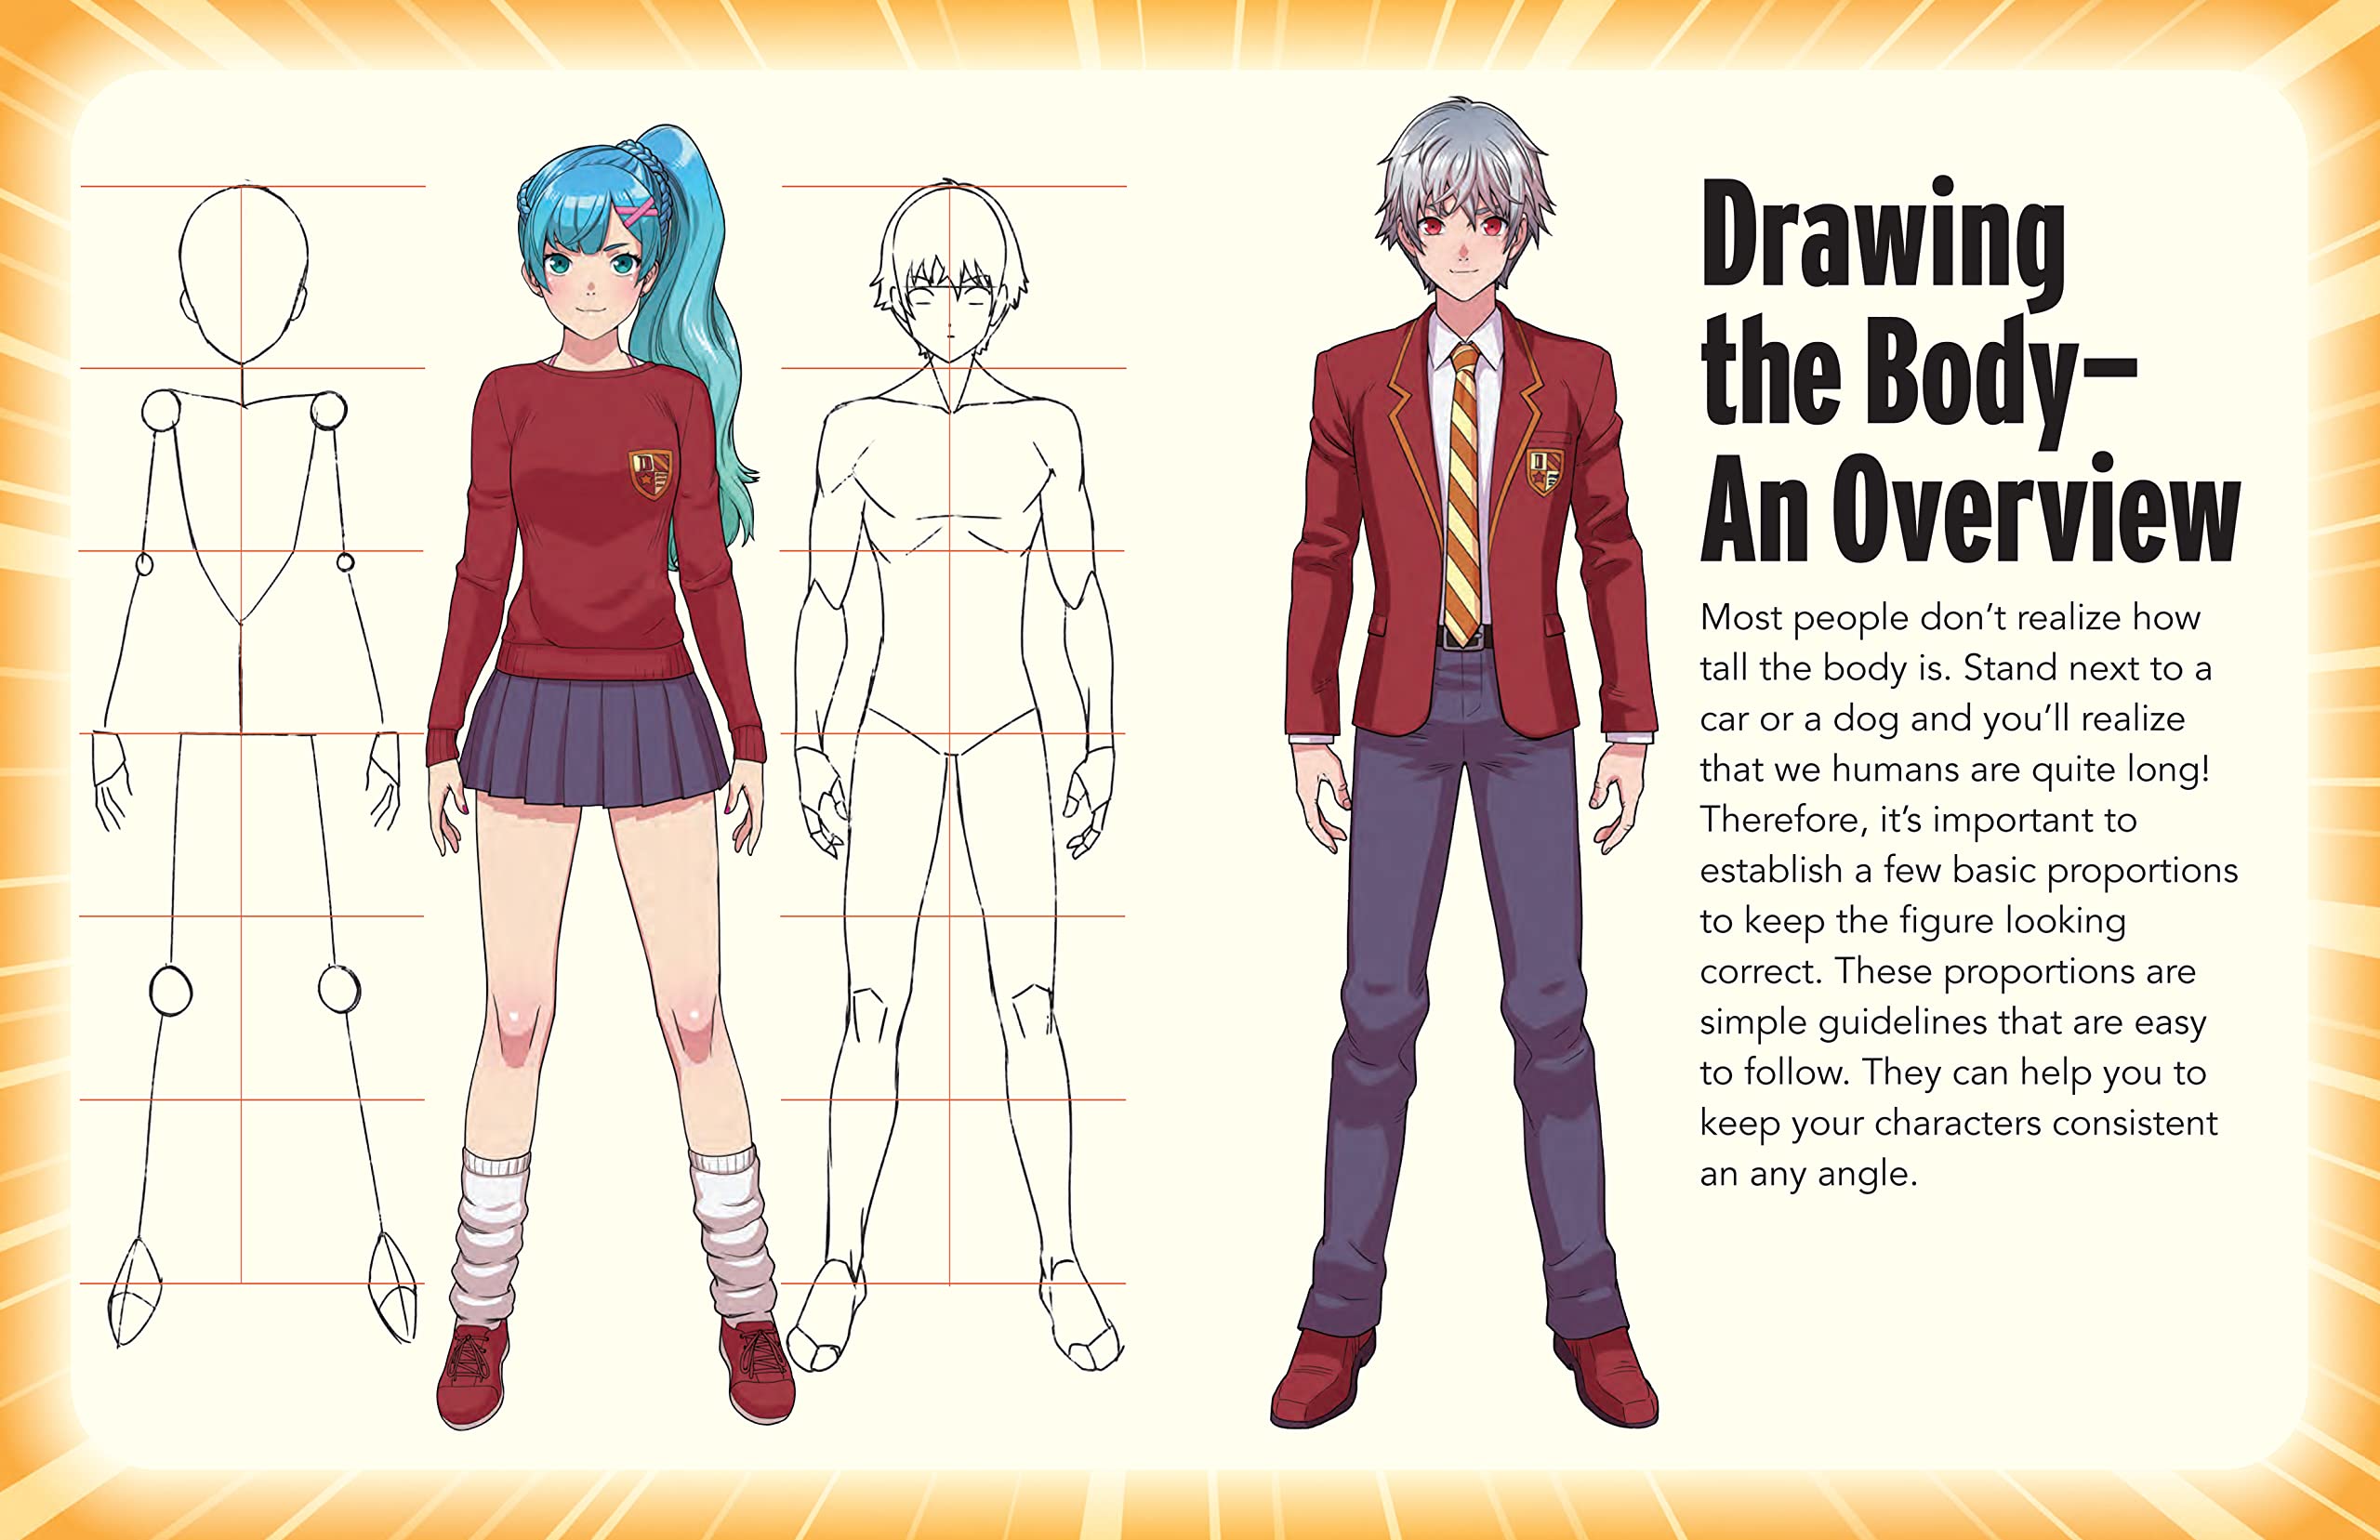 Manga 100: The Cute Collection: How to Draw Your Favorite Character Types from Popular Genres